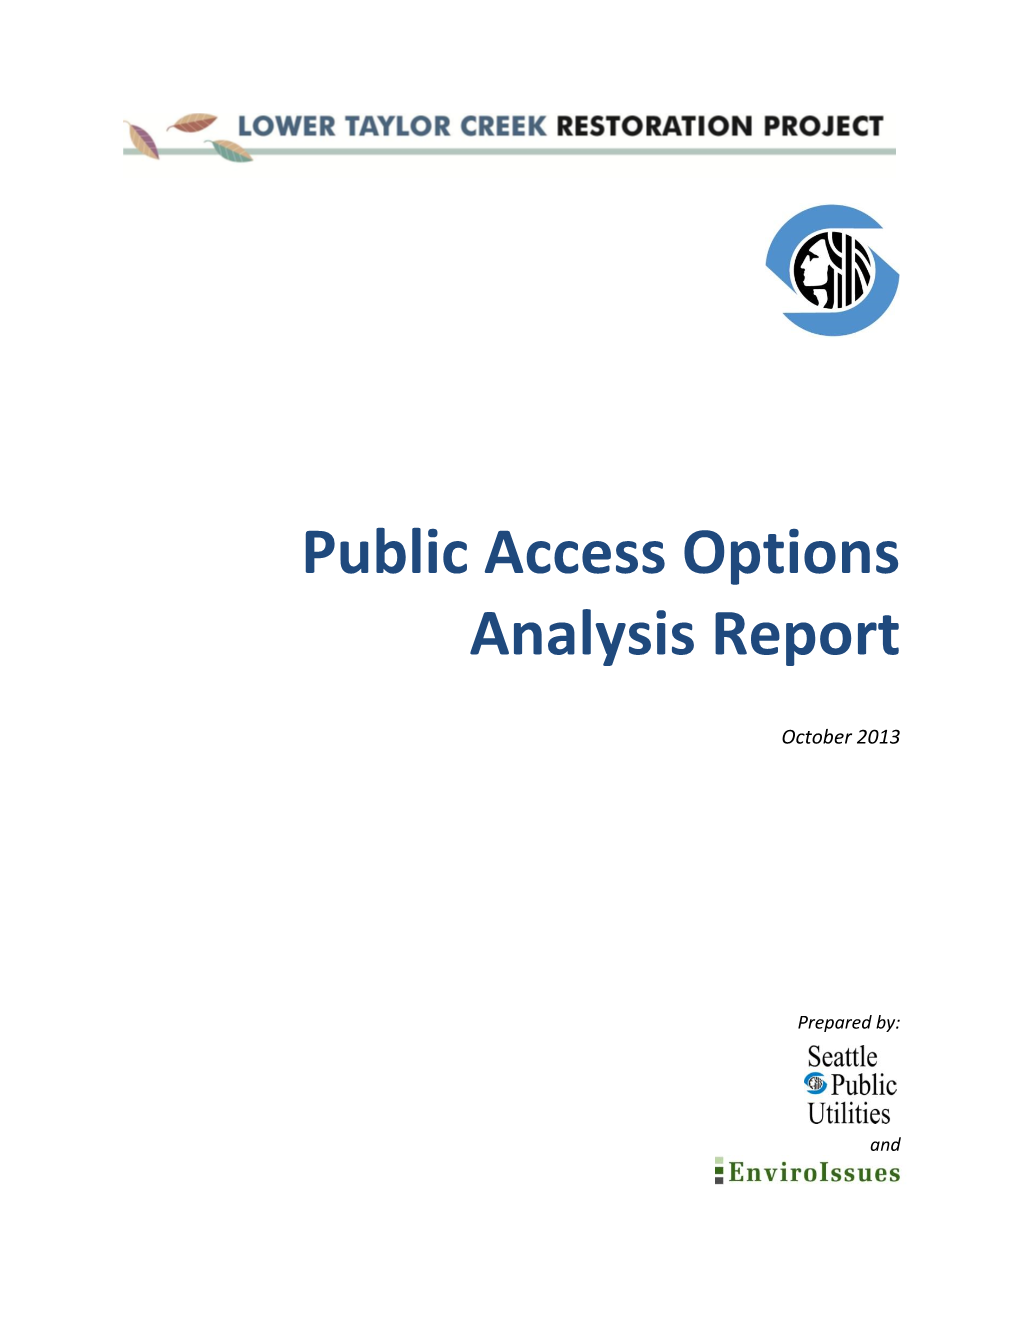 Public Access Options Analysis Report